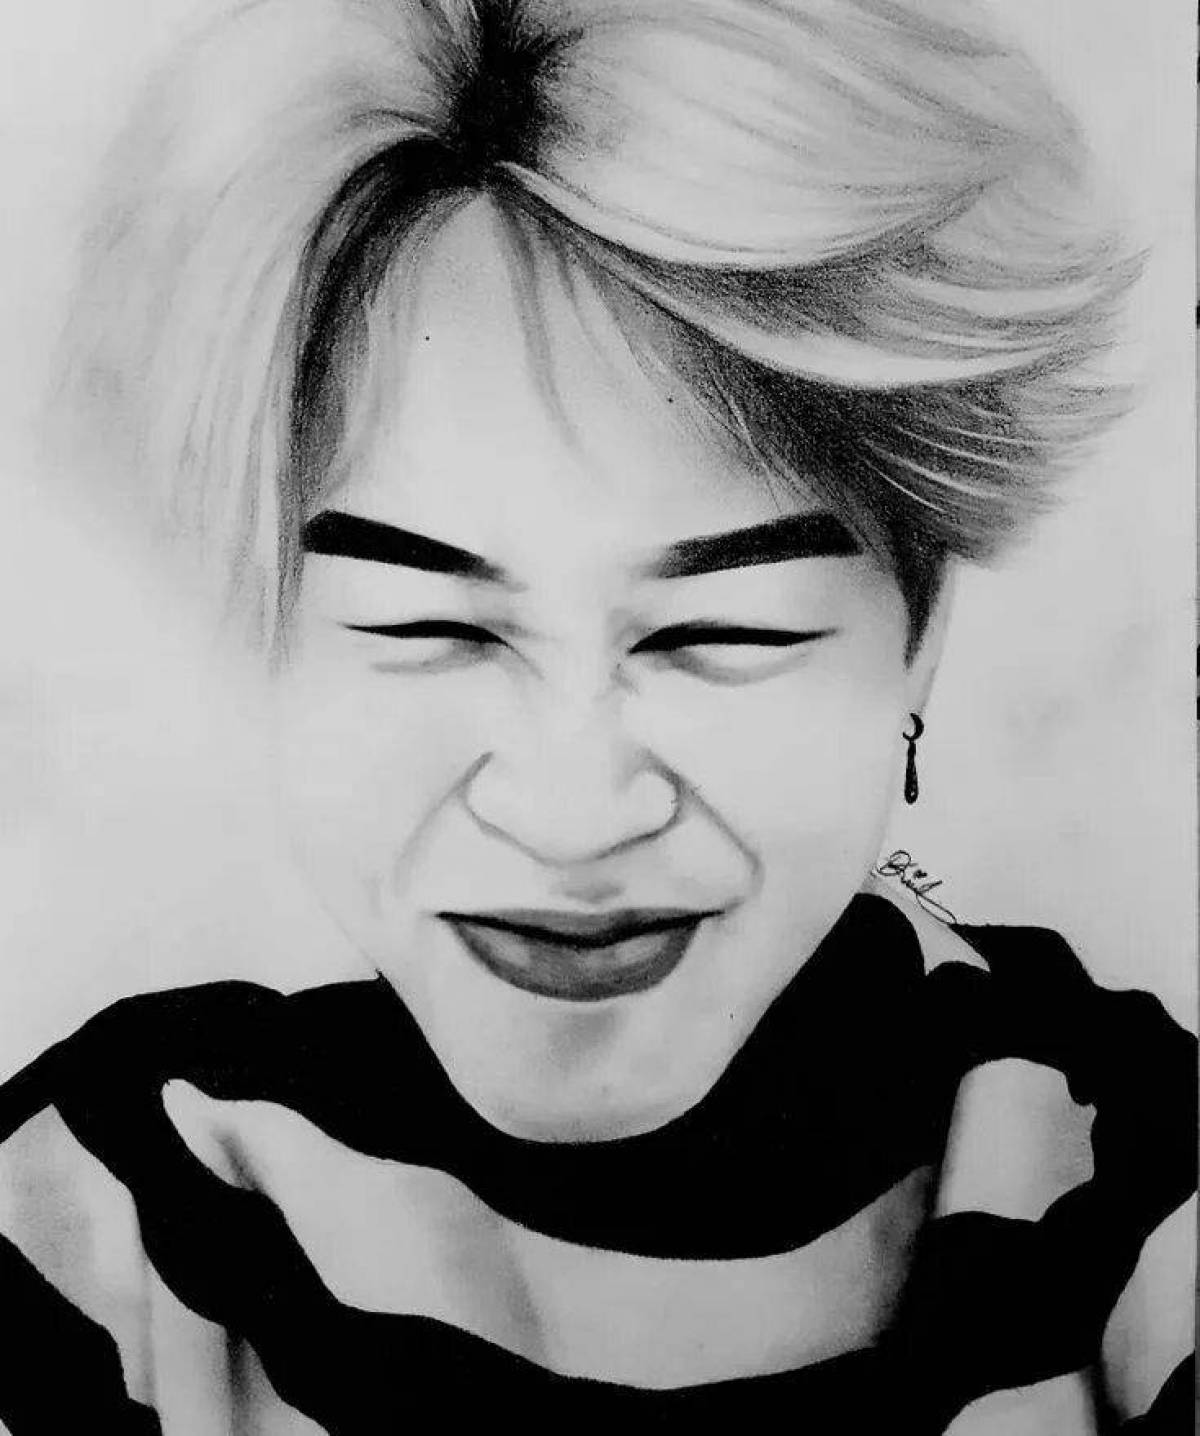 Bts jimin style coloring book